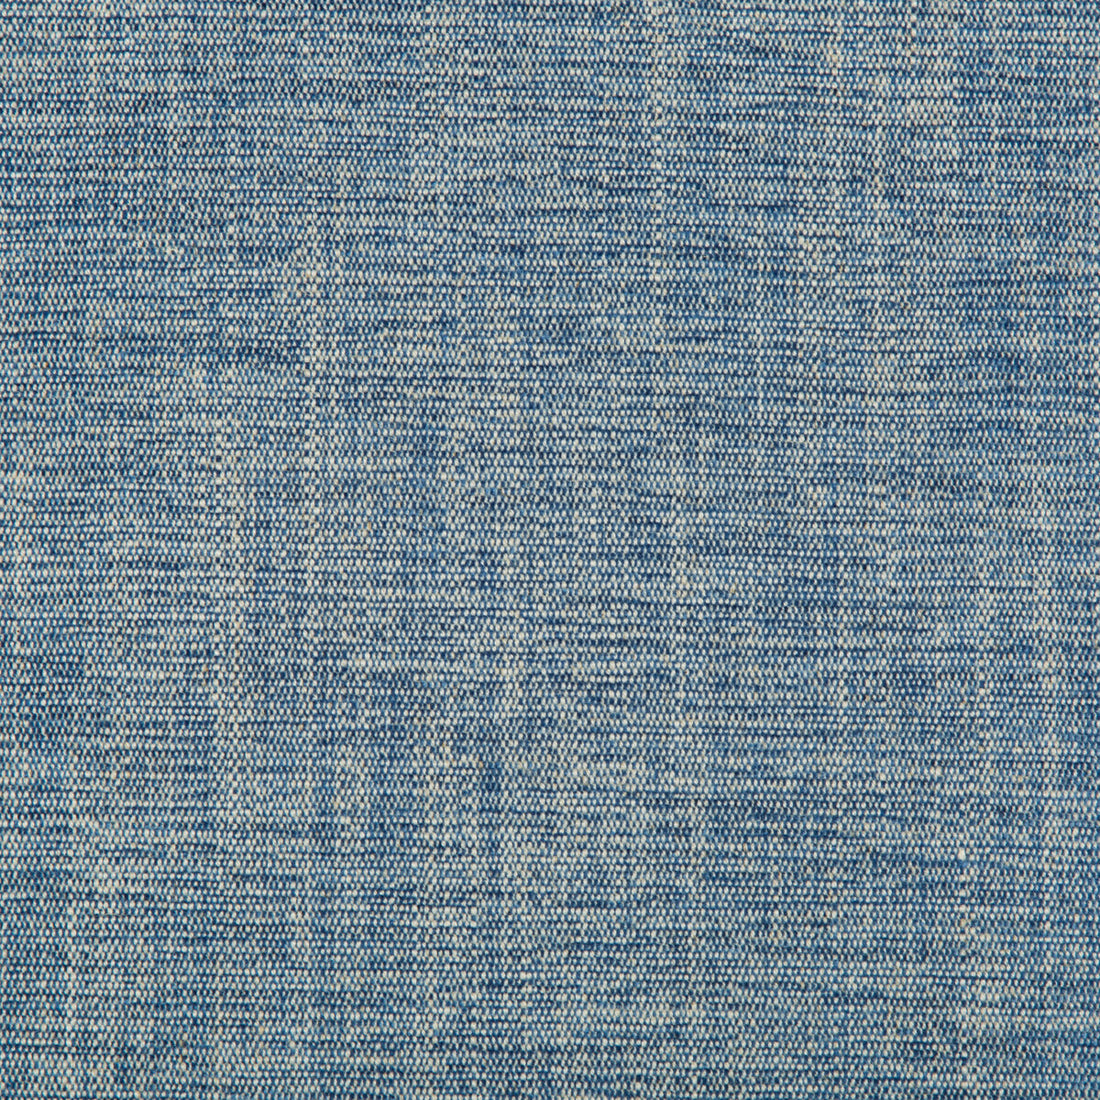 Rutledge fabric in ocean color - pattern 35297.5.0 - by Kravet Basics in the Greenwich collection